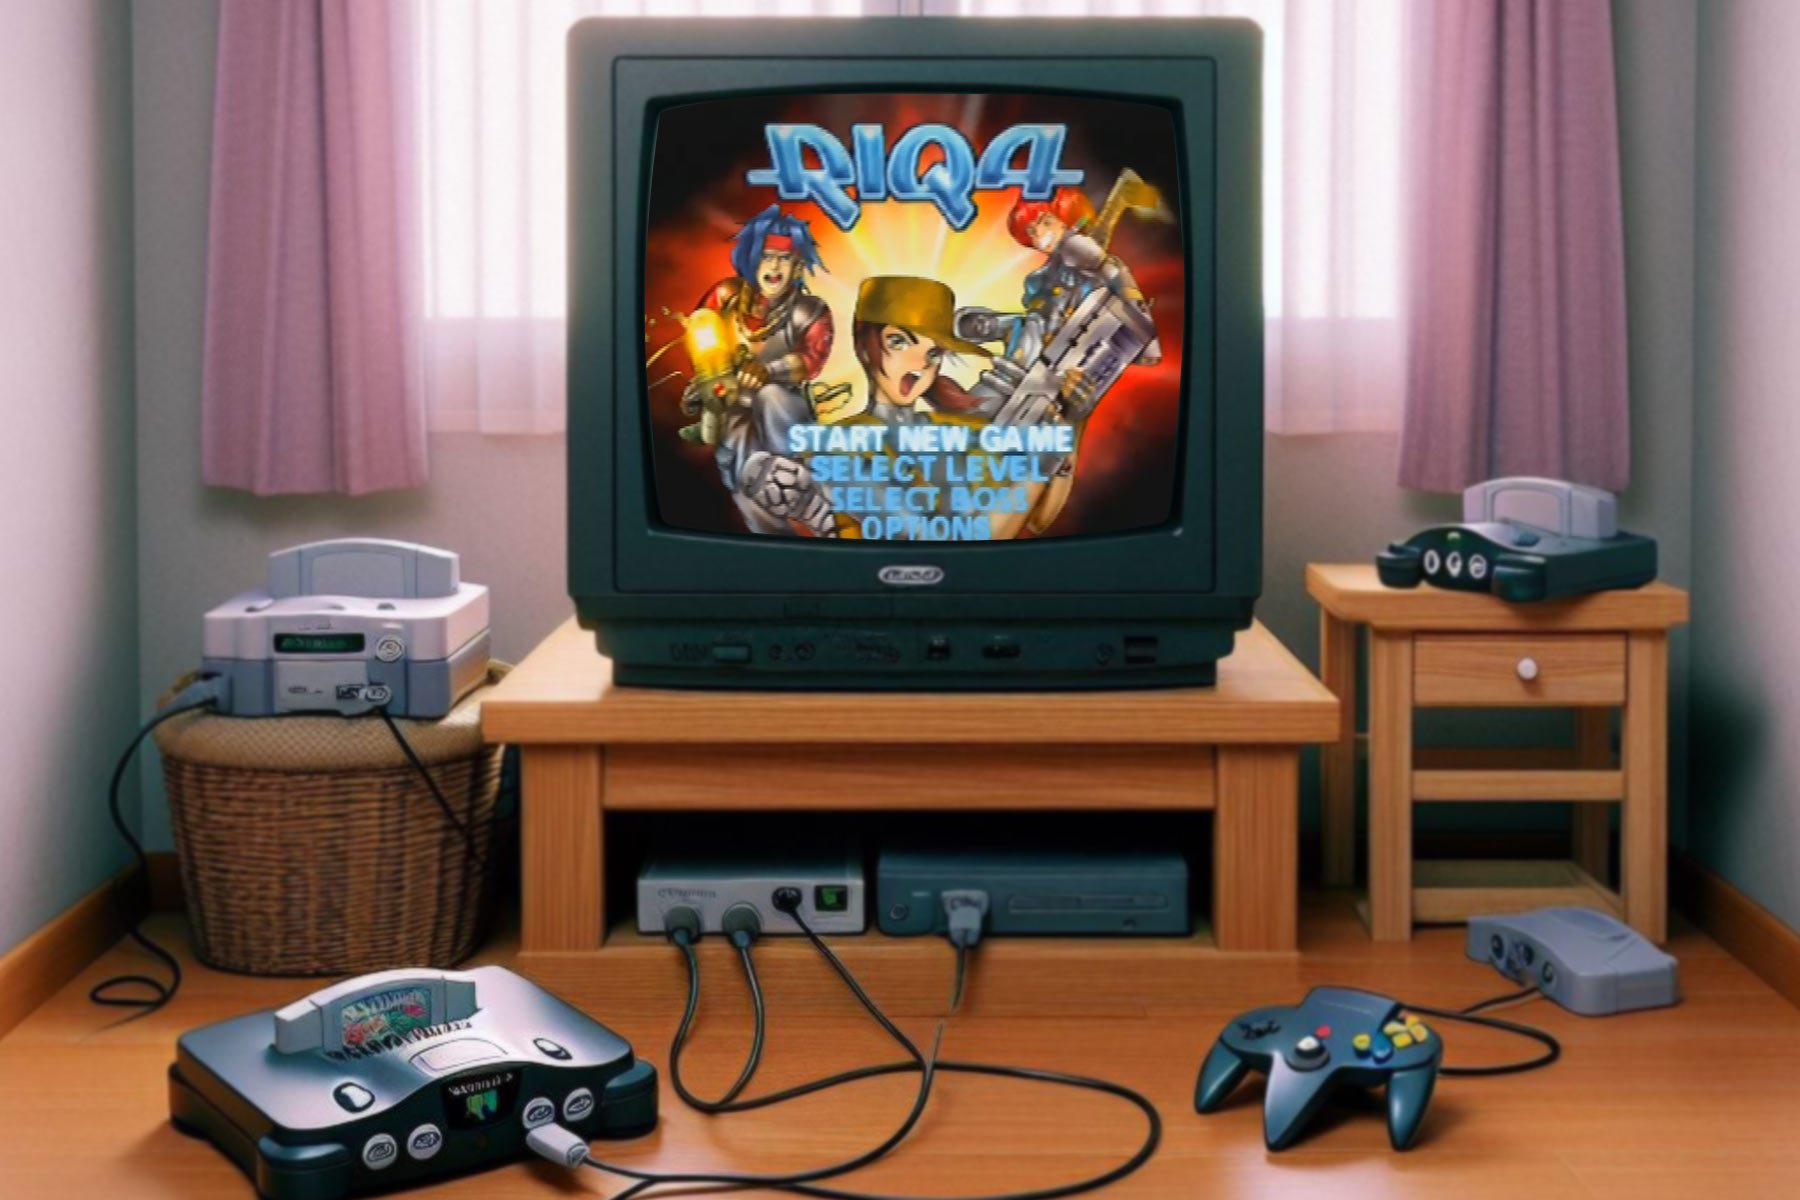 Riqa is a canceled Tomb Raider clone for Nintendo 64 and you can finally play it